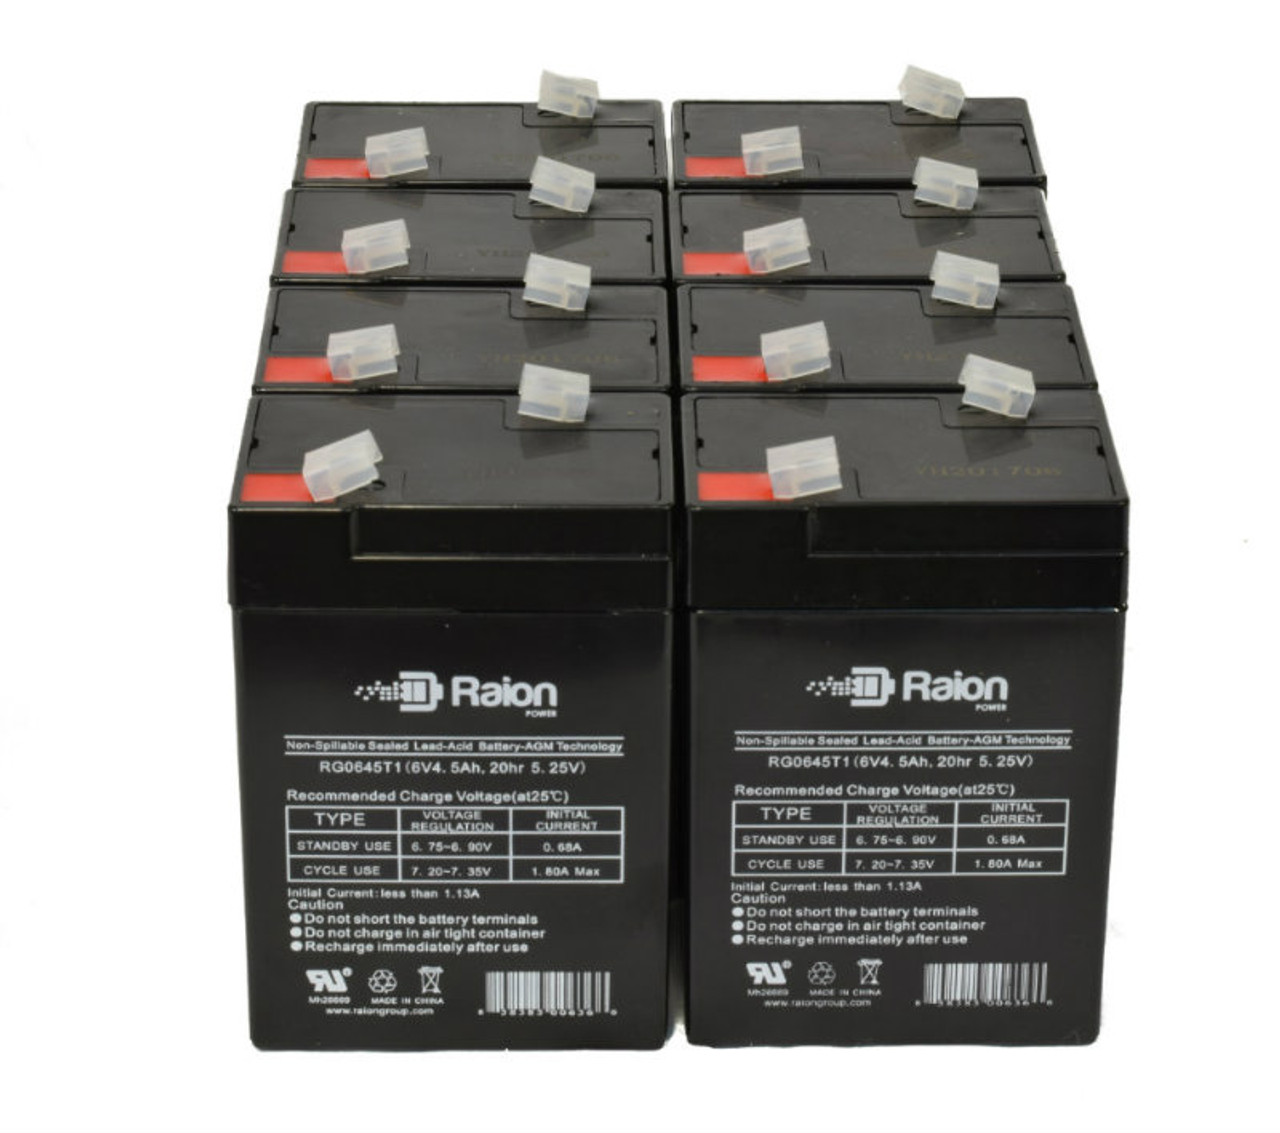 Raion Power 6V 4.5Ah Replacement Emergency Light Battery for Portalac GS PE6V4.5F1 - 8 Pack